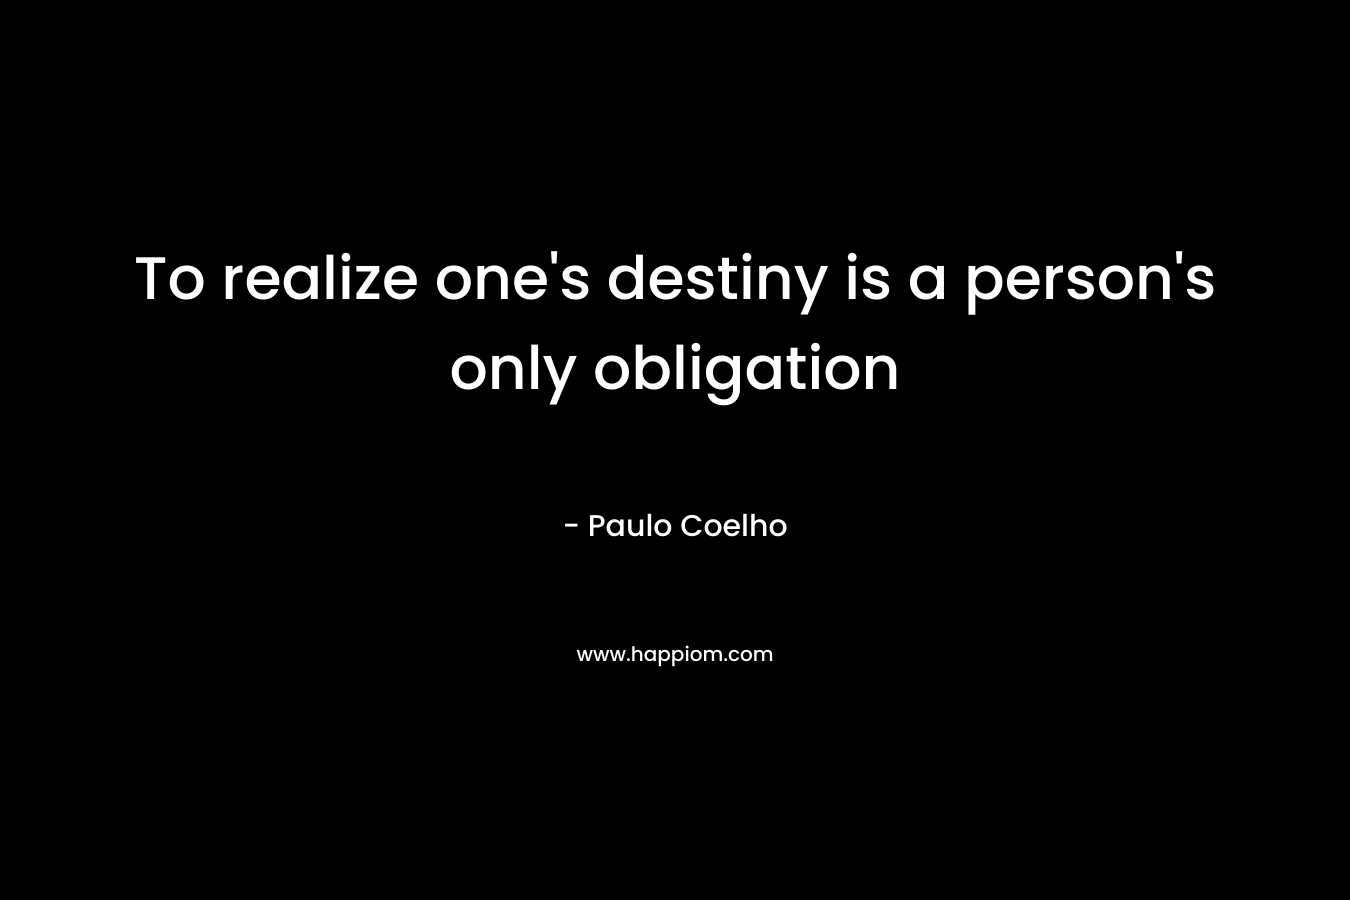 To realize one's destiny is a person's only obligation